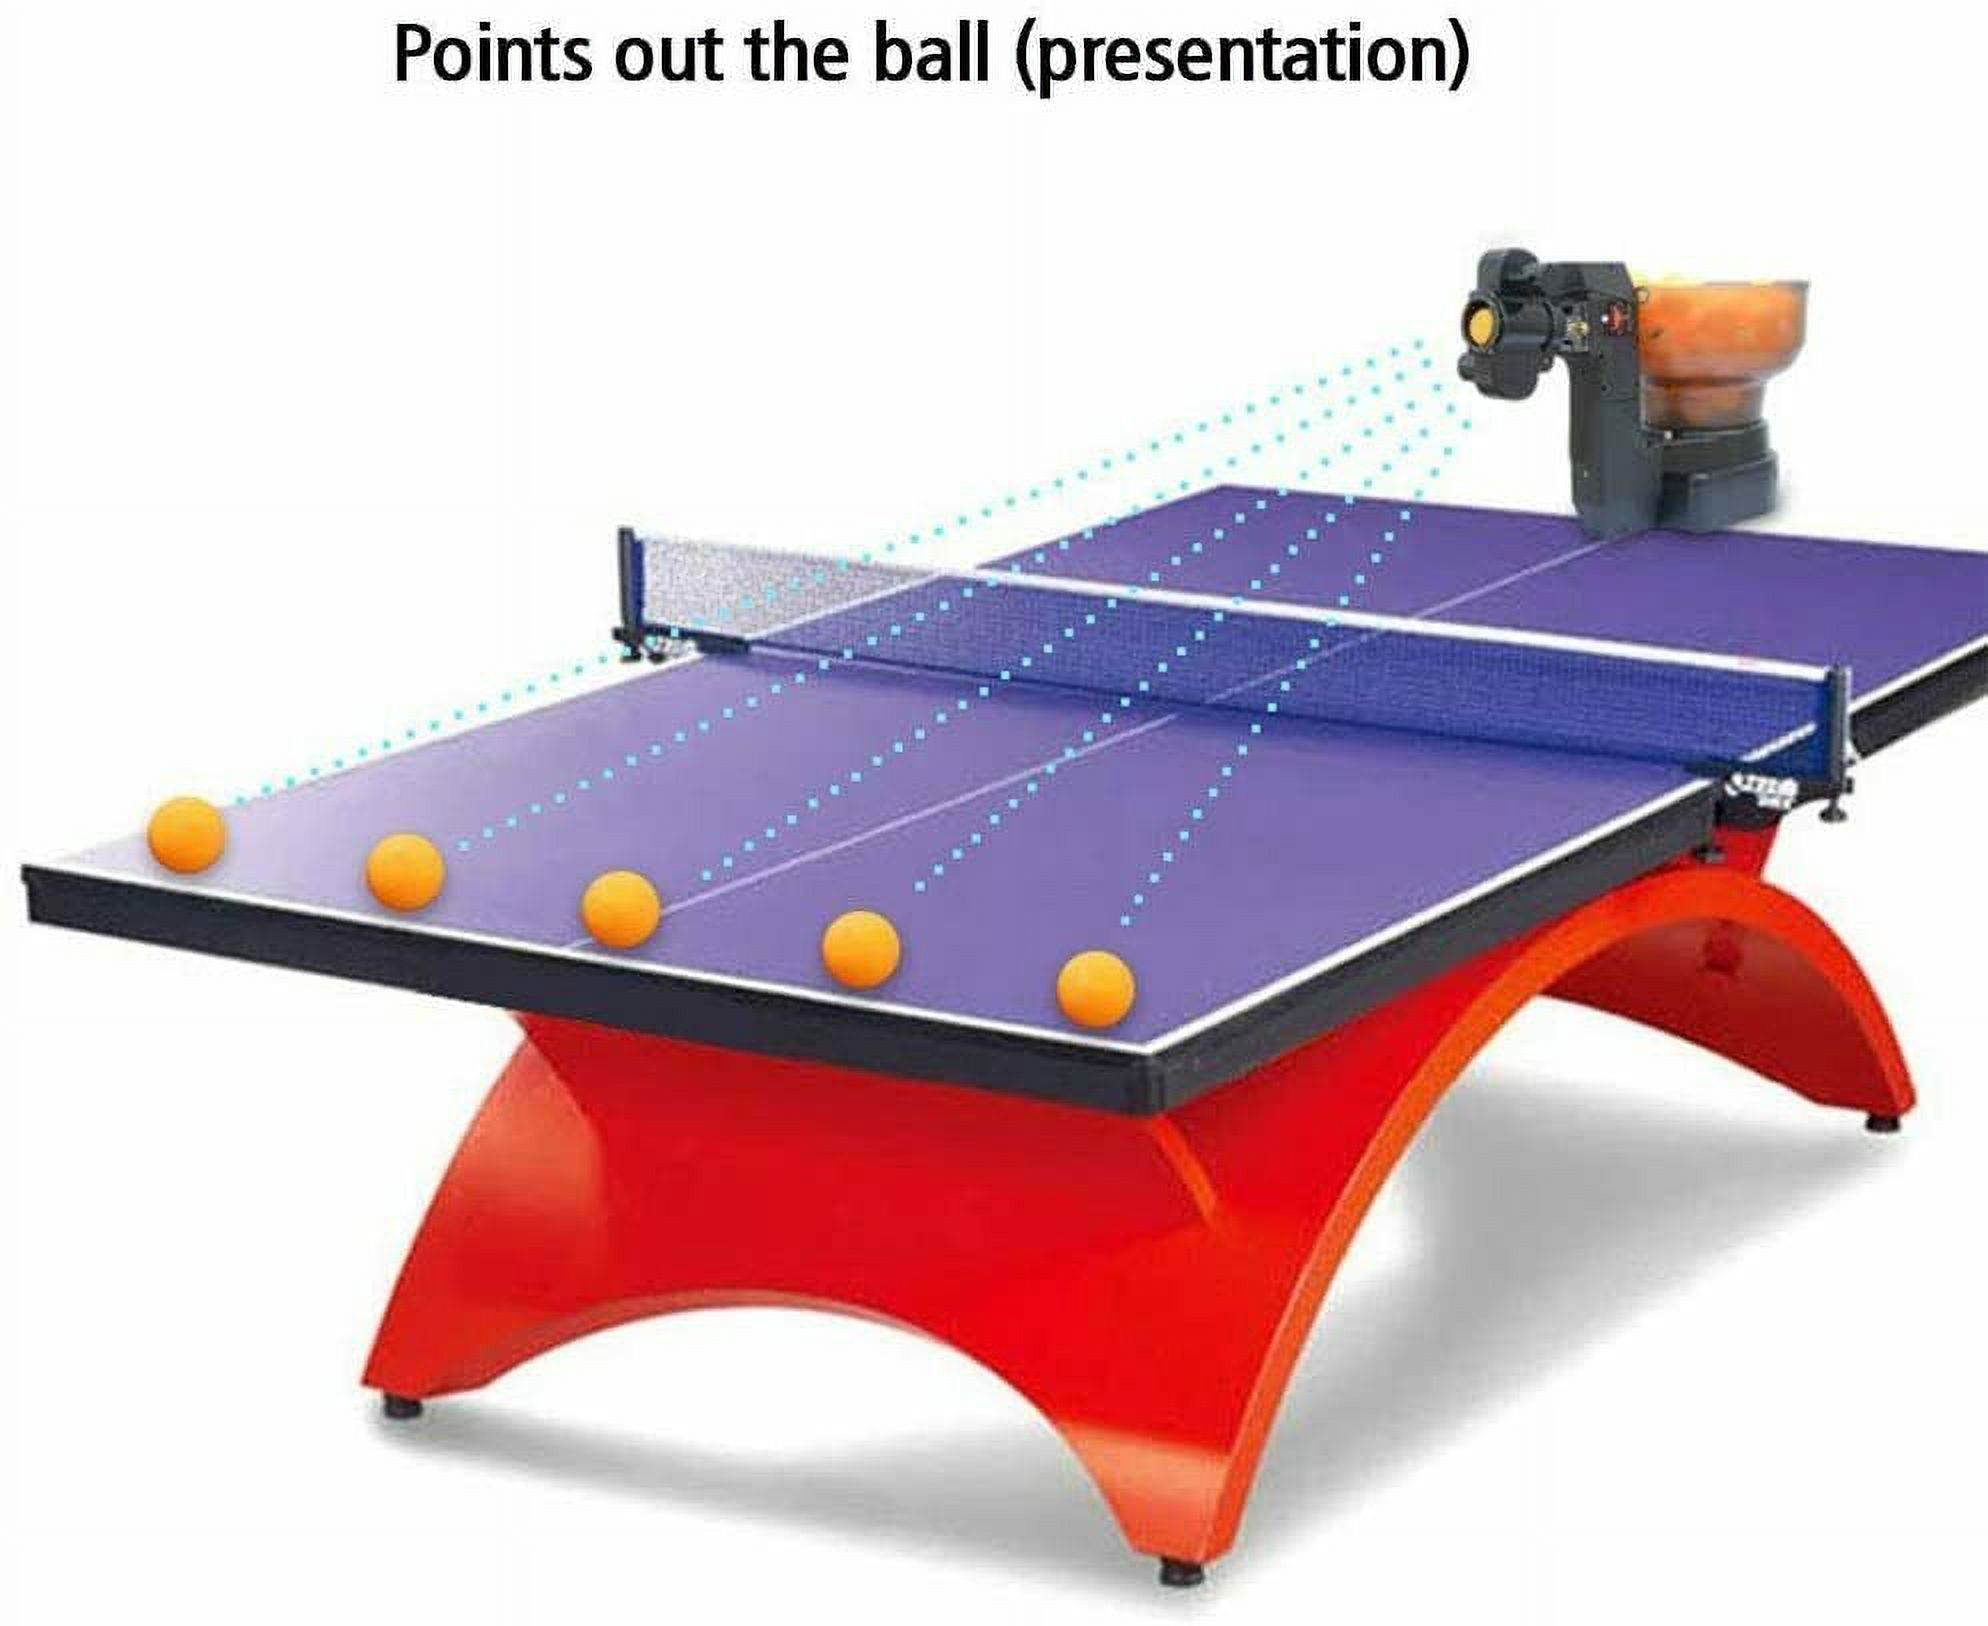 OUKANING Table Tennis Robot Ping Pong Ball Training Machine Ping Pong Robots Professional - image 3 of 9